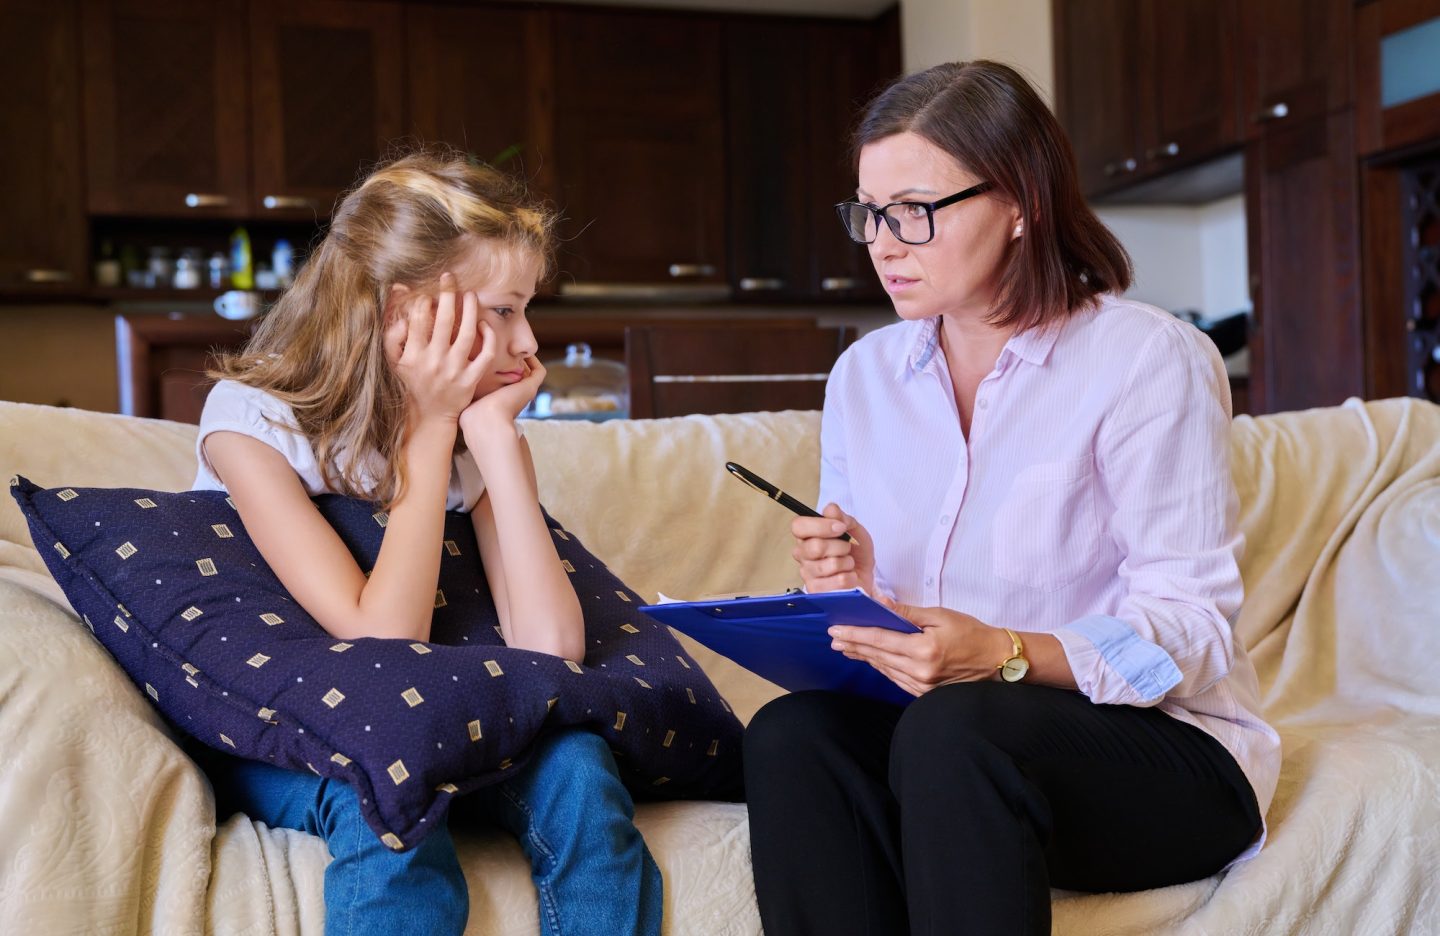 individual-therapy-session-for-child-girl-with-psychologist.jpg